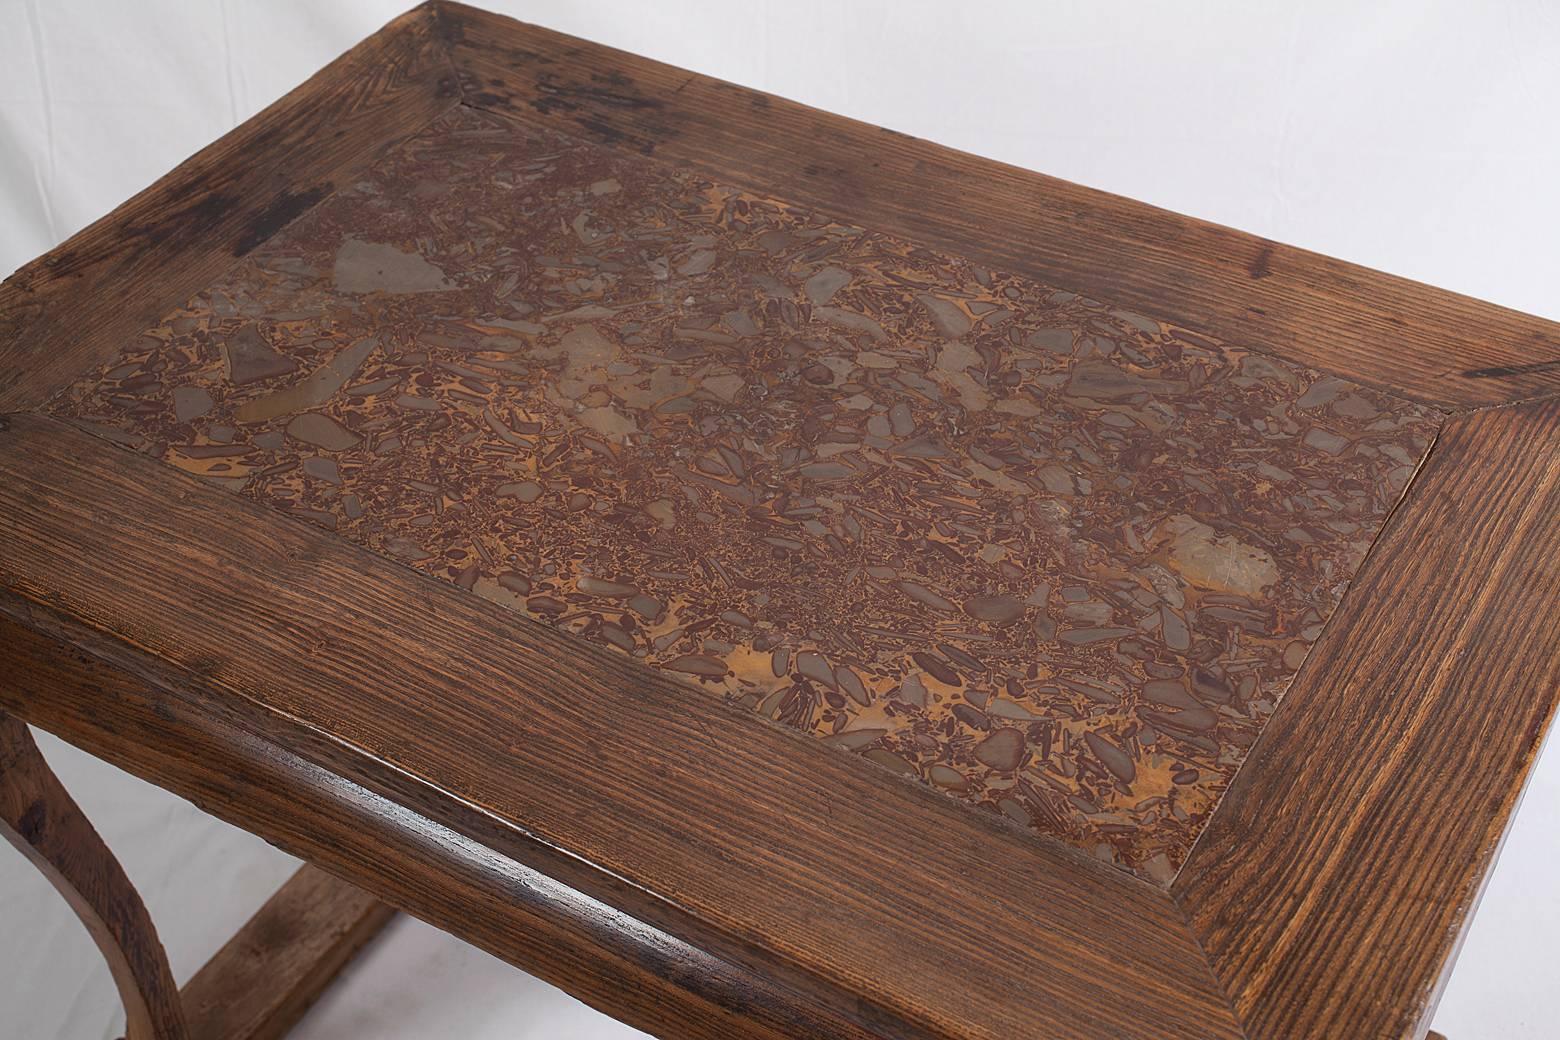 
This elegantly shaped Northern elm table is a great example of Shanxi province’s vernacular furniture. Shape and style suggest it was used as an offering table in front of a long altar table. 
The top frame houses a beautiful, over 4 cm thick